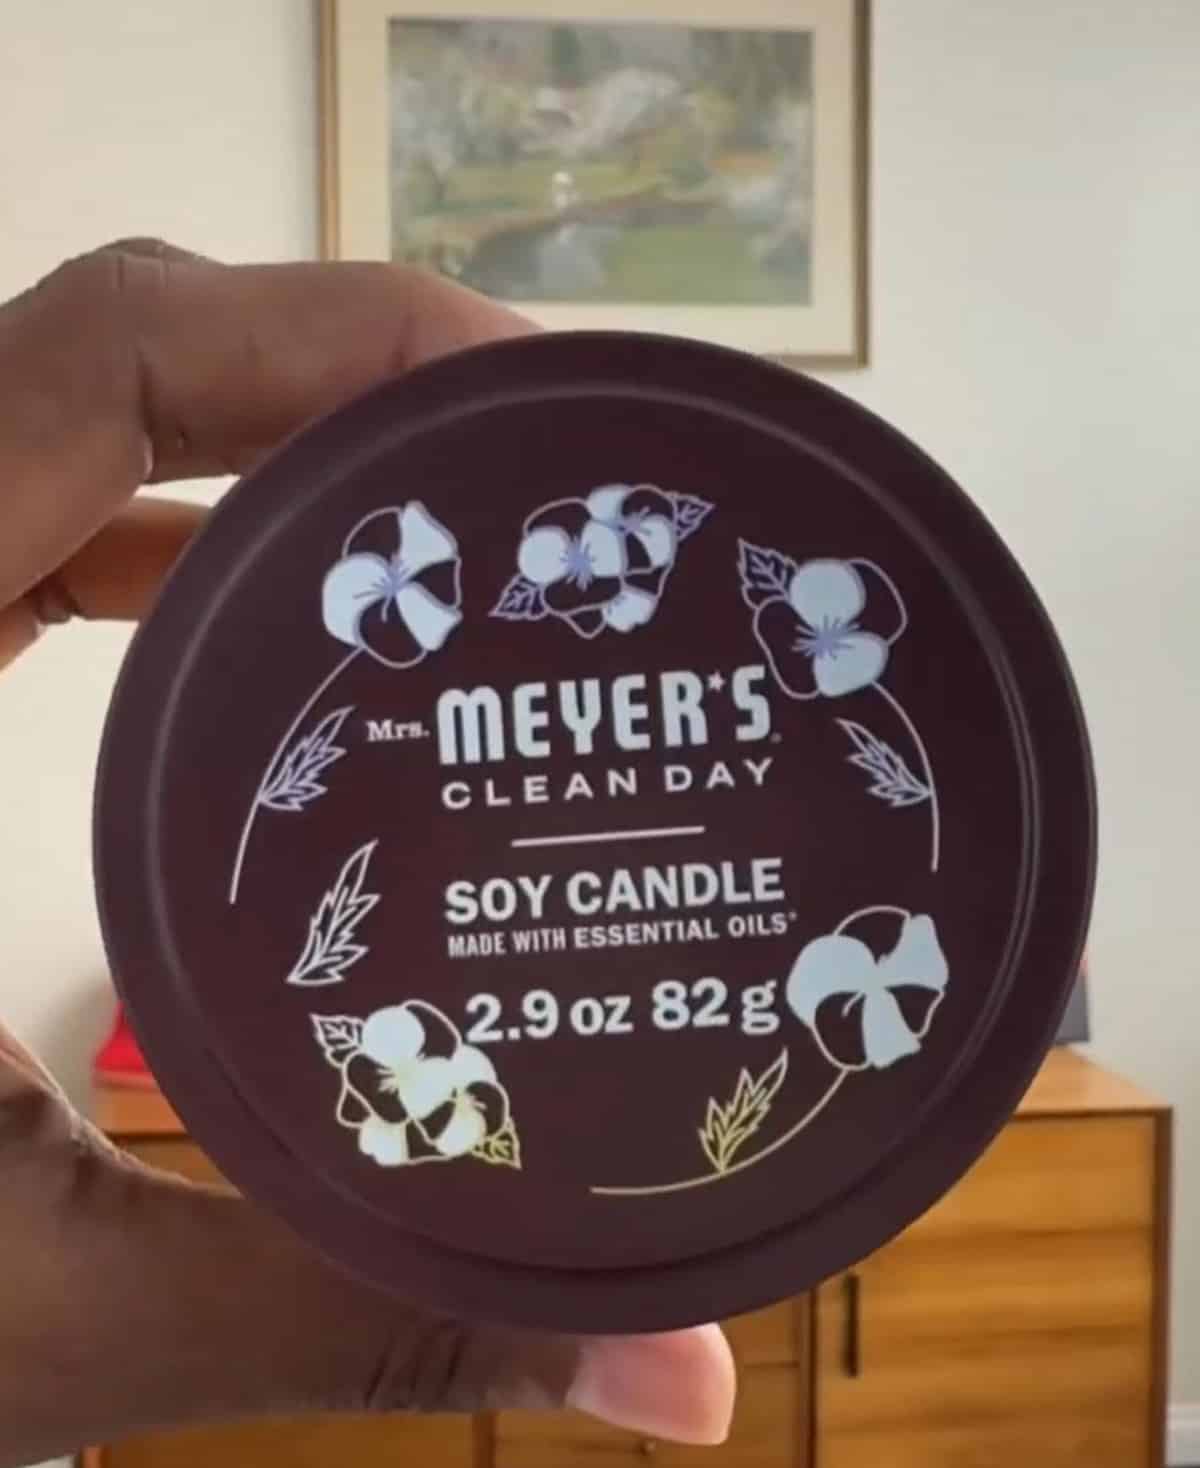 A lid from a Mrs. Meyer's  brand soy candle.